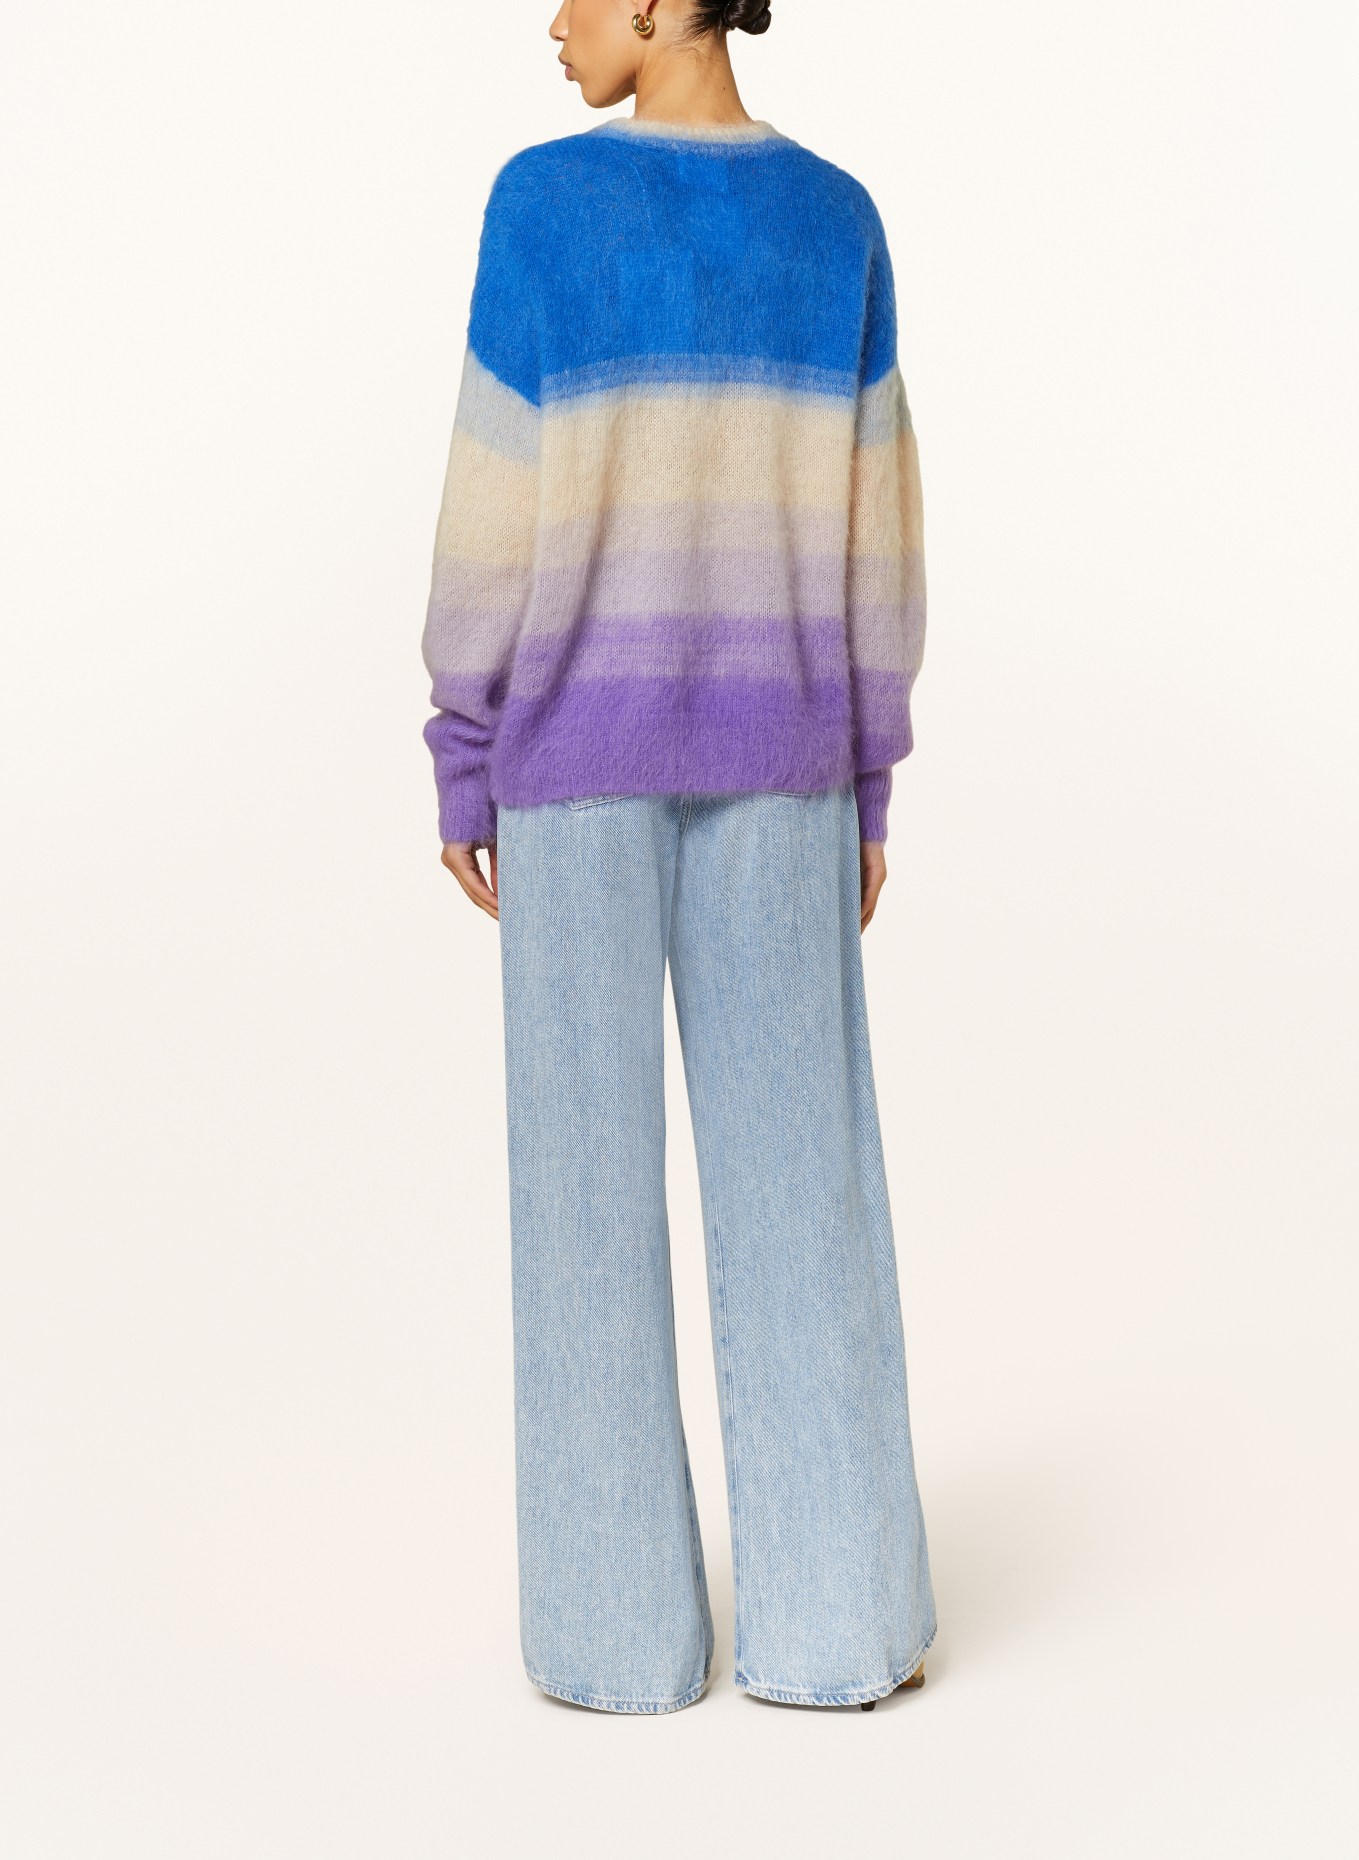 MARANT ÉTOILE Sweater DRUSSELL with mohair, Color: BLUE/ WHITE/ PURPLE (Image 3)